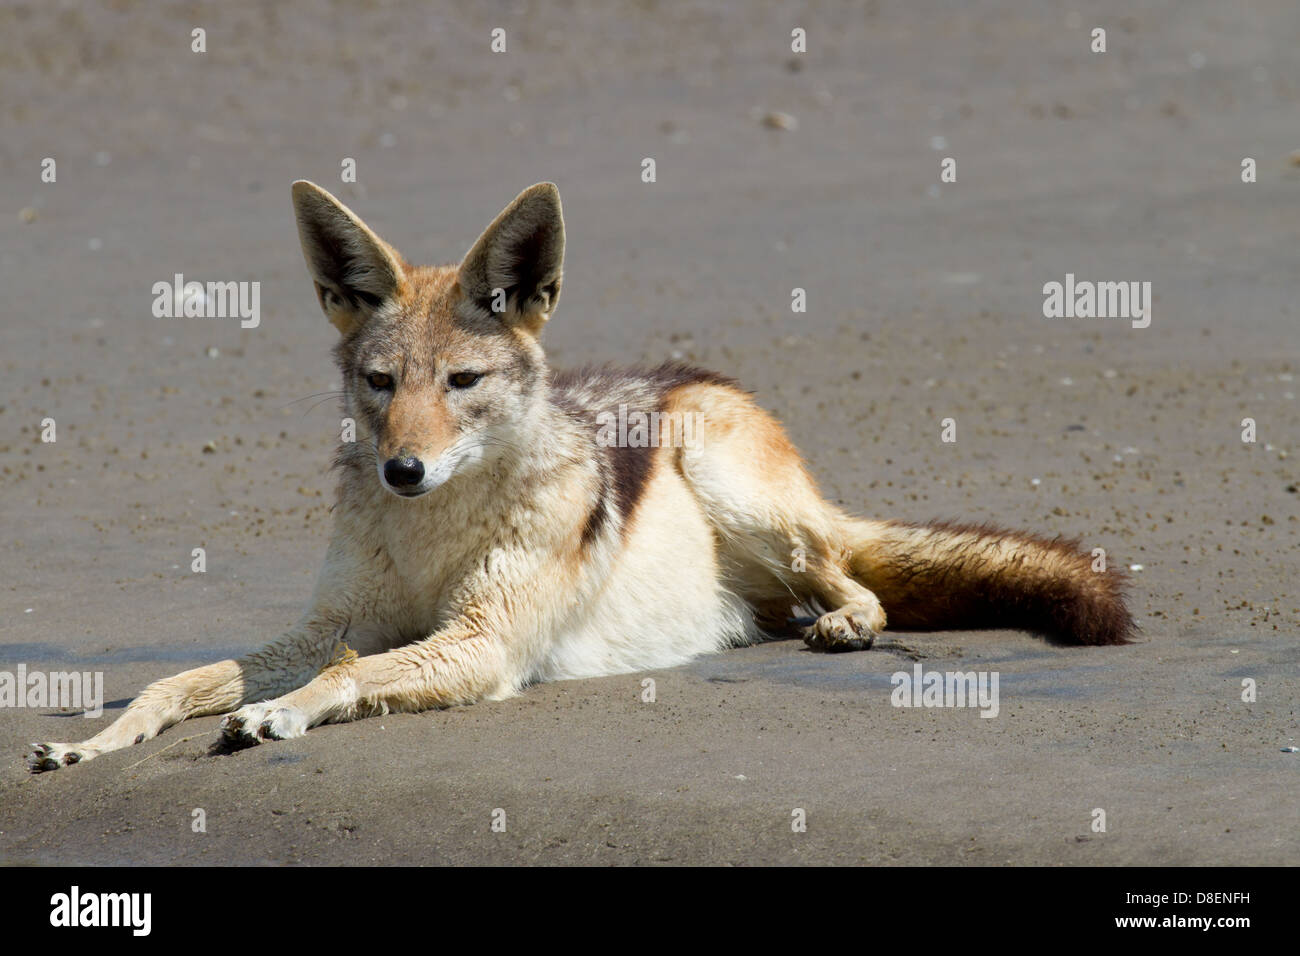 Silver Backed Jackal at Sandwich Harbour, Namibia Stock Photo